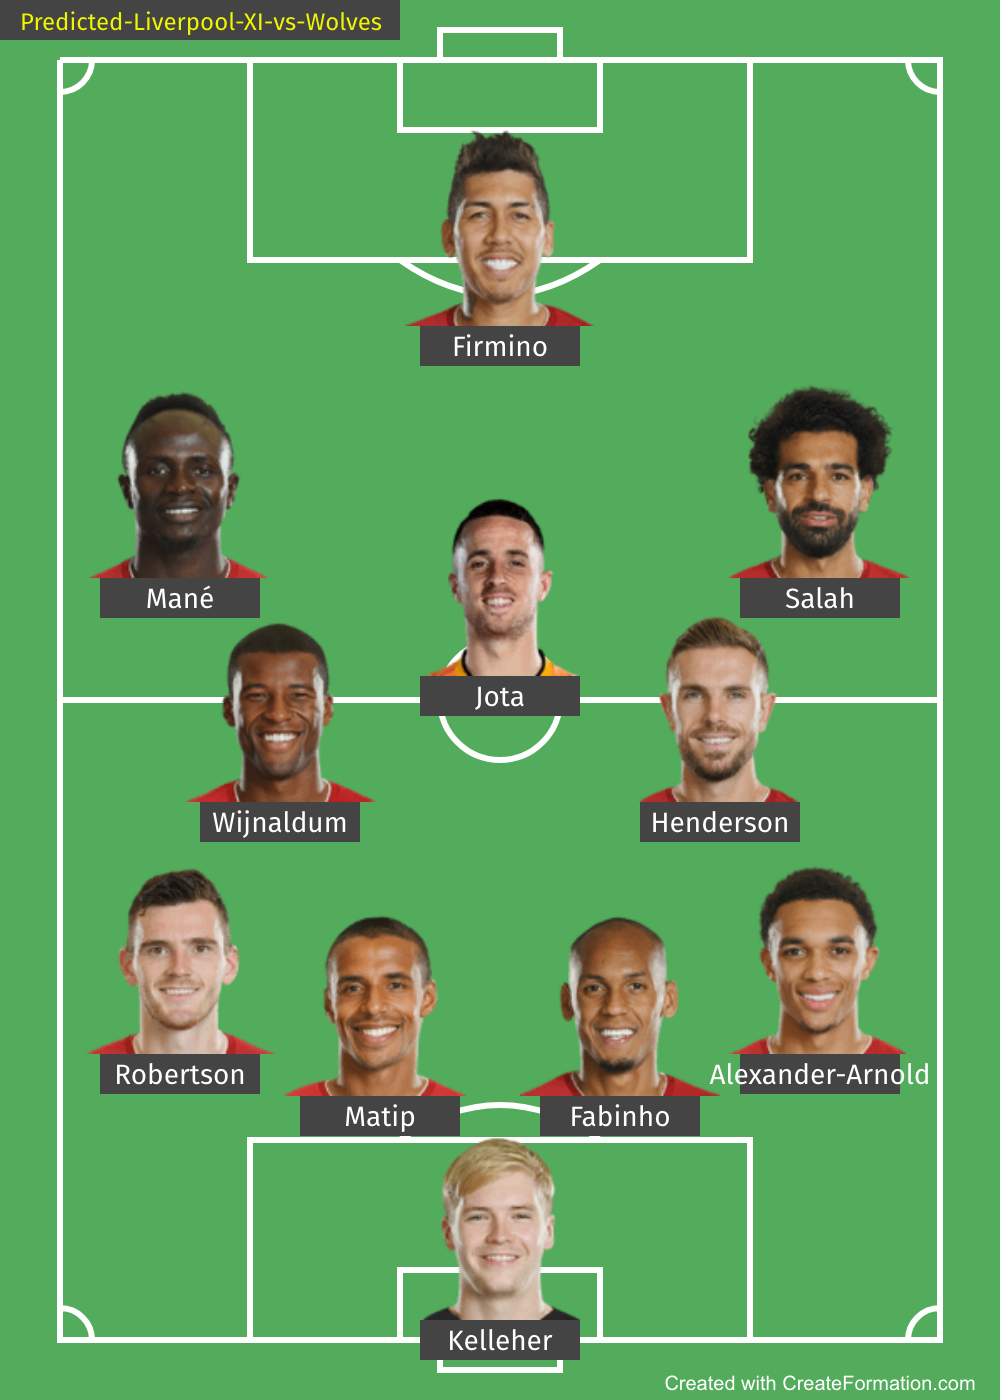 Predicted-Liverpool-XI-vs-Wolves